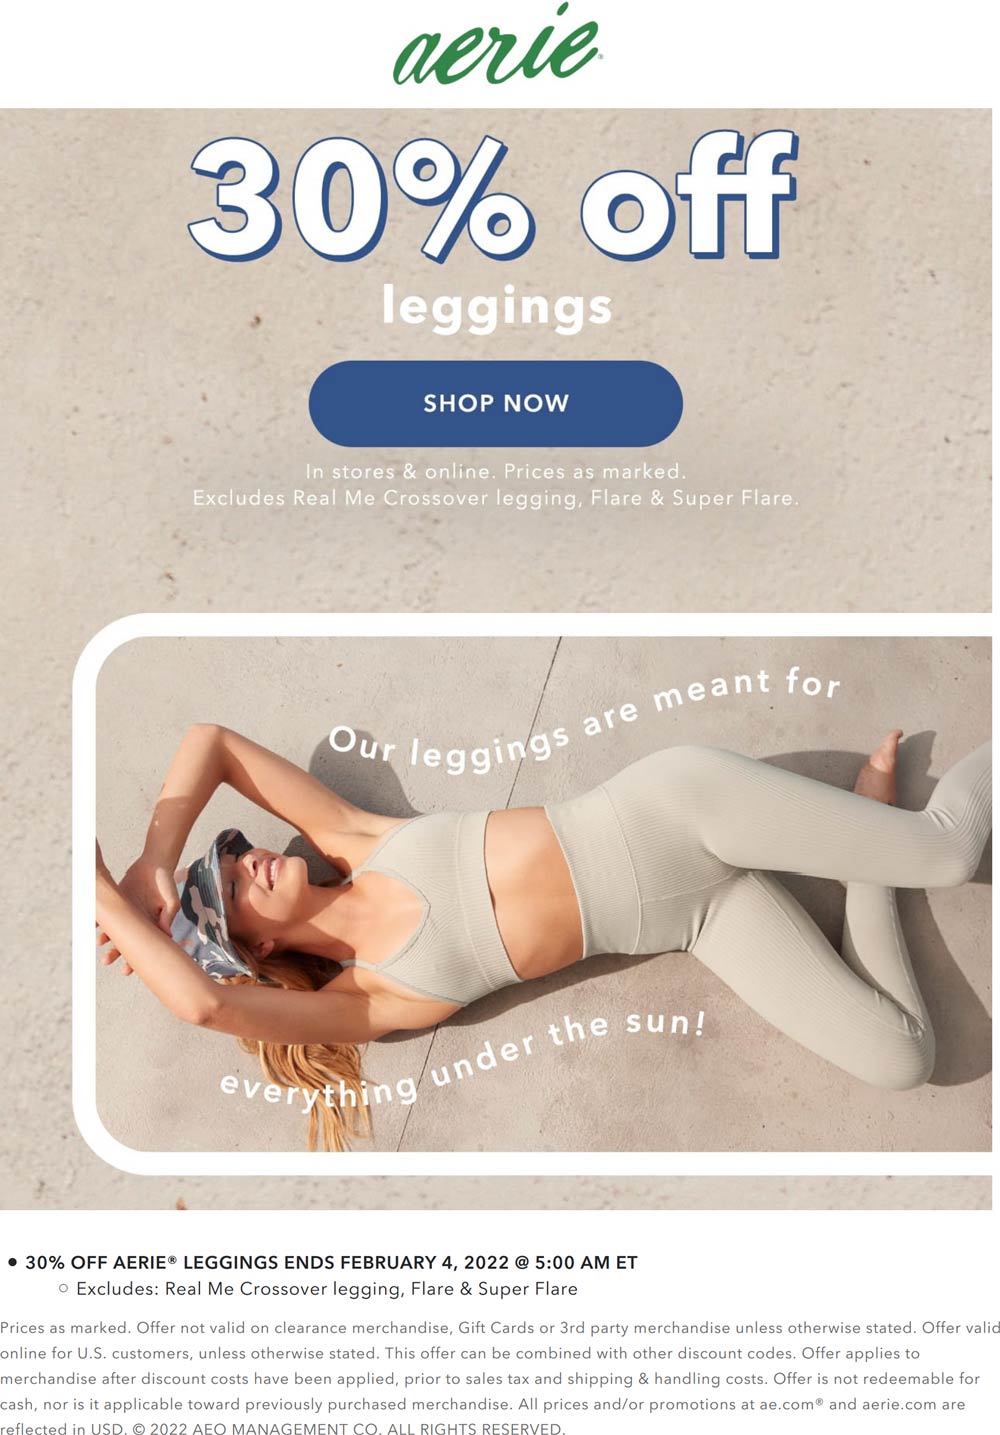 Aerie stores Coupon  30% off leggings at Aerie, ditto online #aerie 